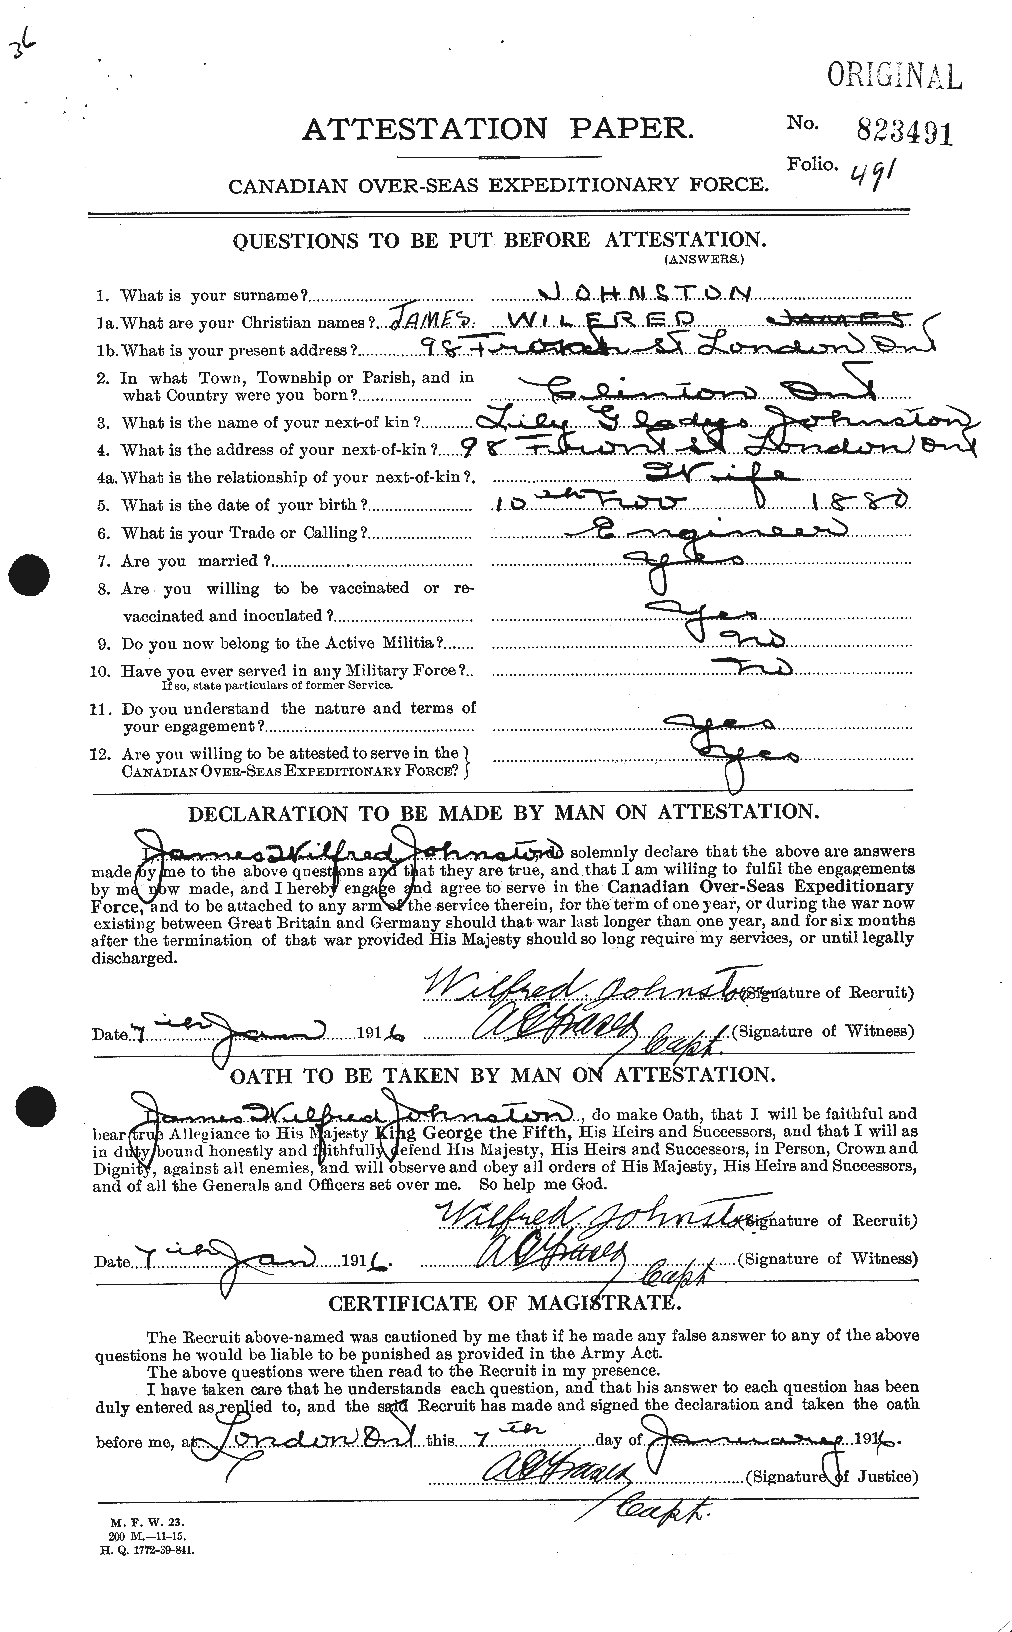 Personnel Records of the First World War - CEF 422757a